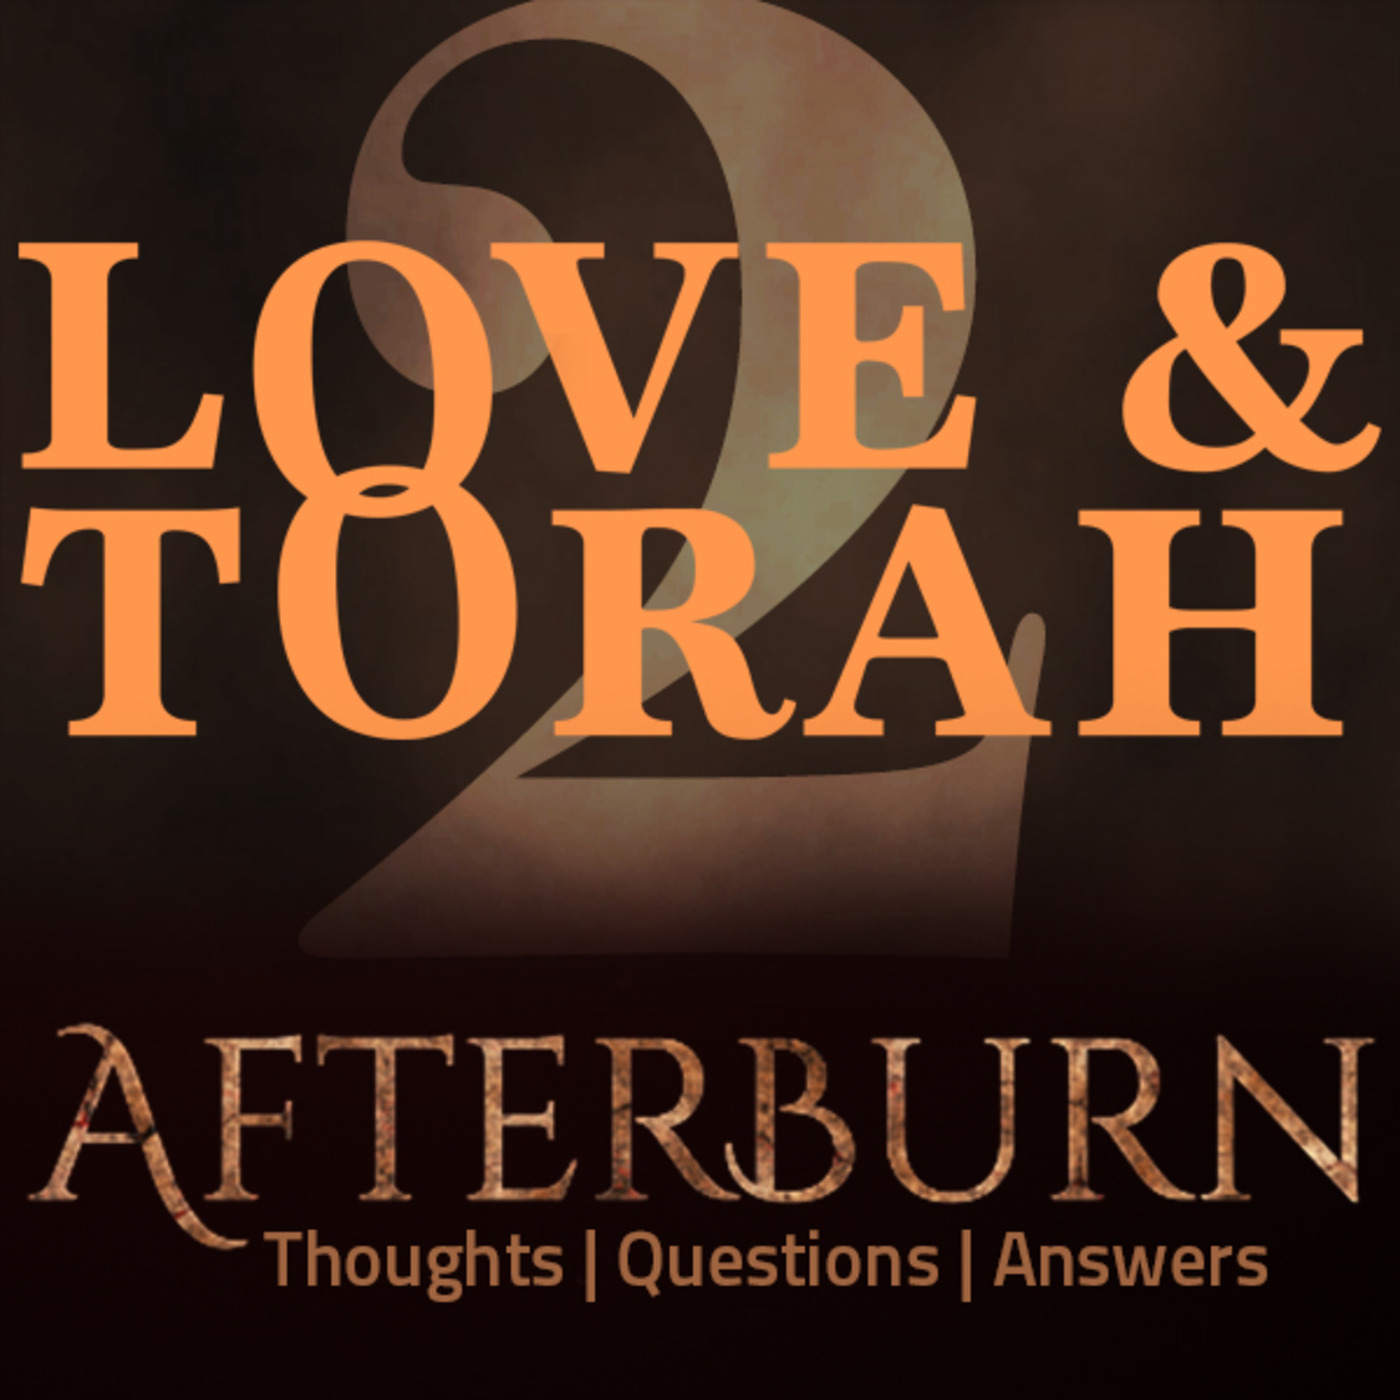 Afterburn: Thoughts, Q&A on Love and Torah - Part 2